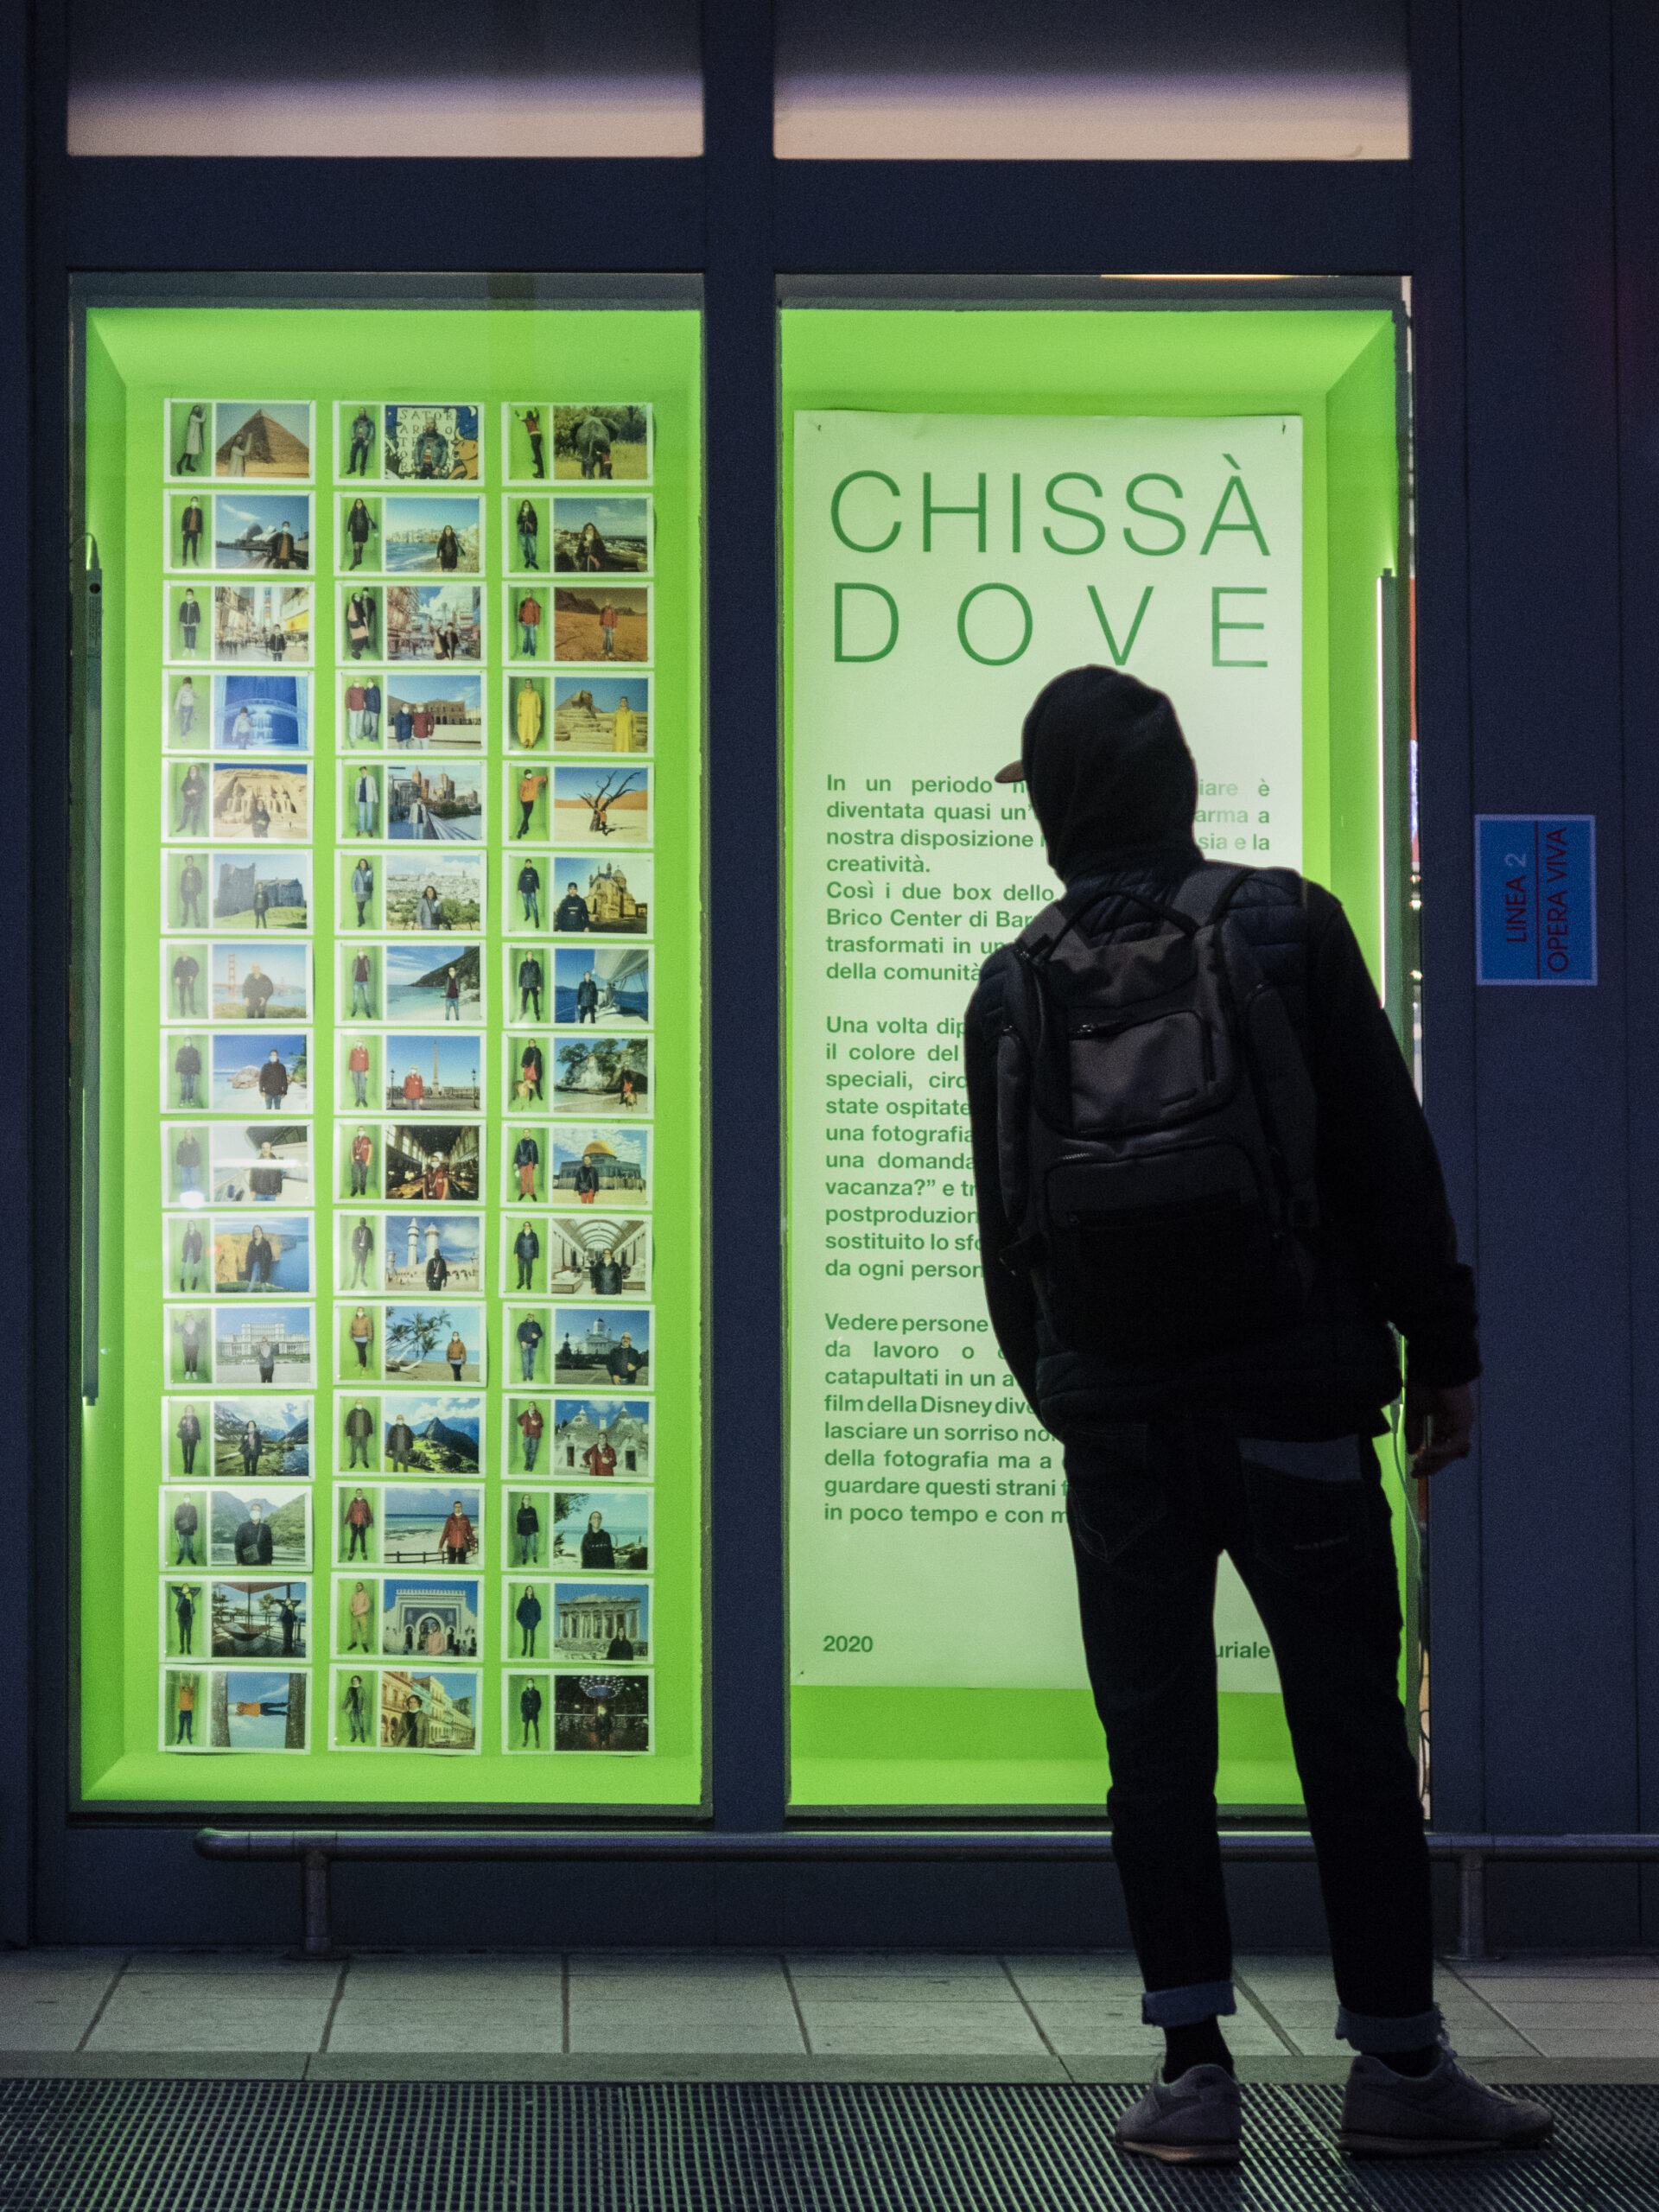 Chissà dove (2020), site specific, installation and performance, printed digital artworks on paper, wood, green screen painting, neon - Marco Curiale - courtesy of the artist